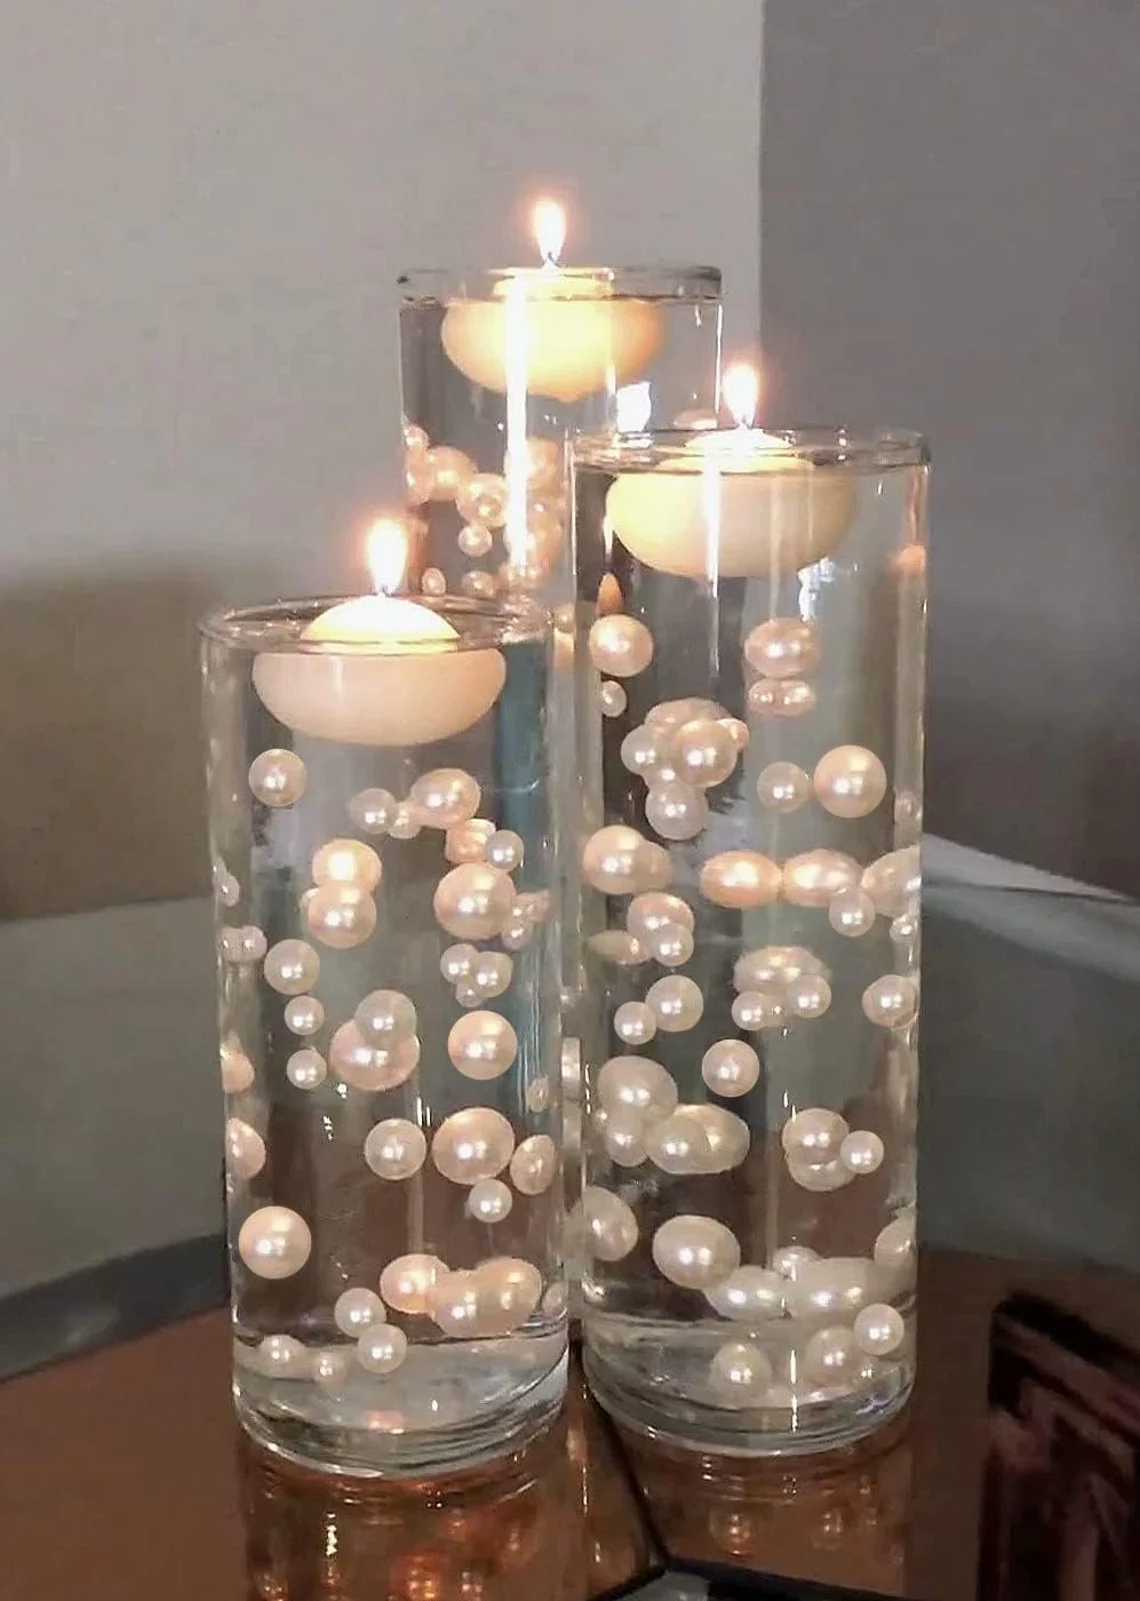 100 Floating Ivory Pearls and Matching Gems-Shiny-Jumbo Sizes-Fills 2 Gallons of Transparent Gels for Floating Effect-With Measured Floating Gels Prep Bags-Option: 6 Submersible Fairy Lights Strings